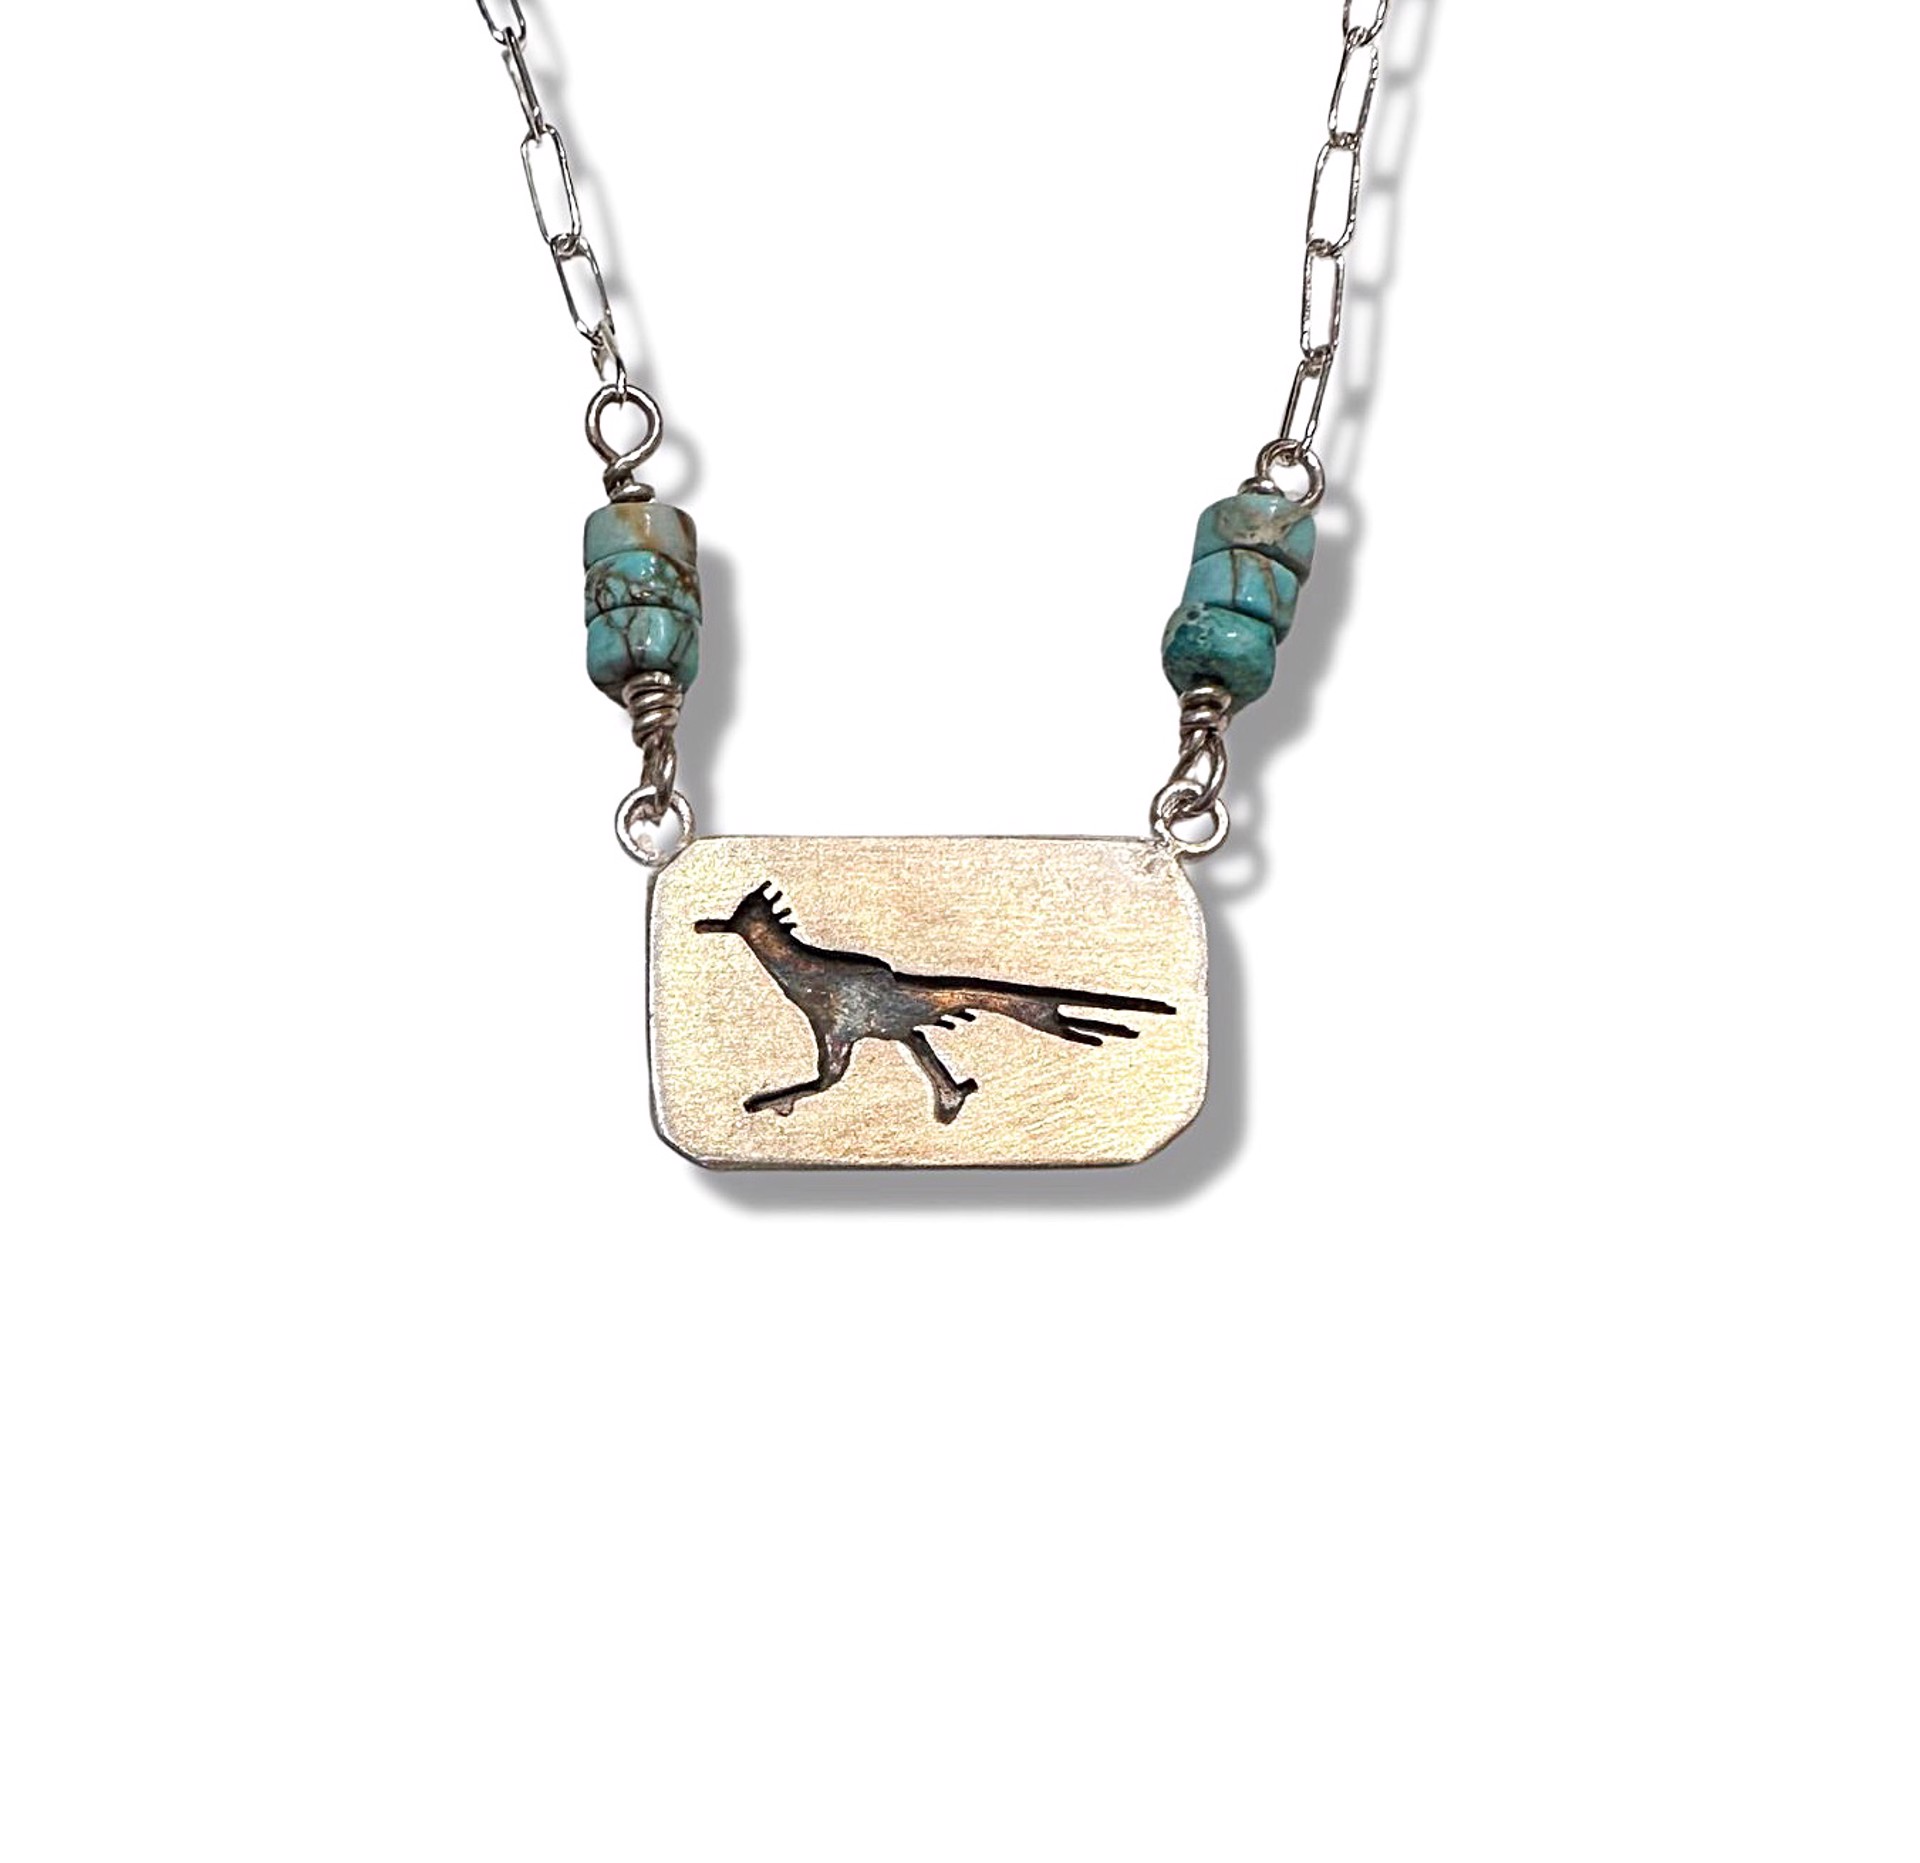 Necklace - Roadrunner set in Sterling Silver with Kingman Turquoise Beads (Medium) by Pattie Parkhurst